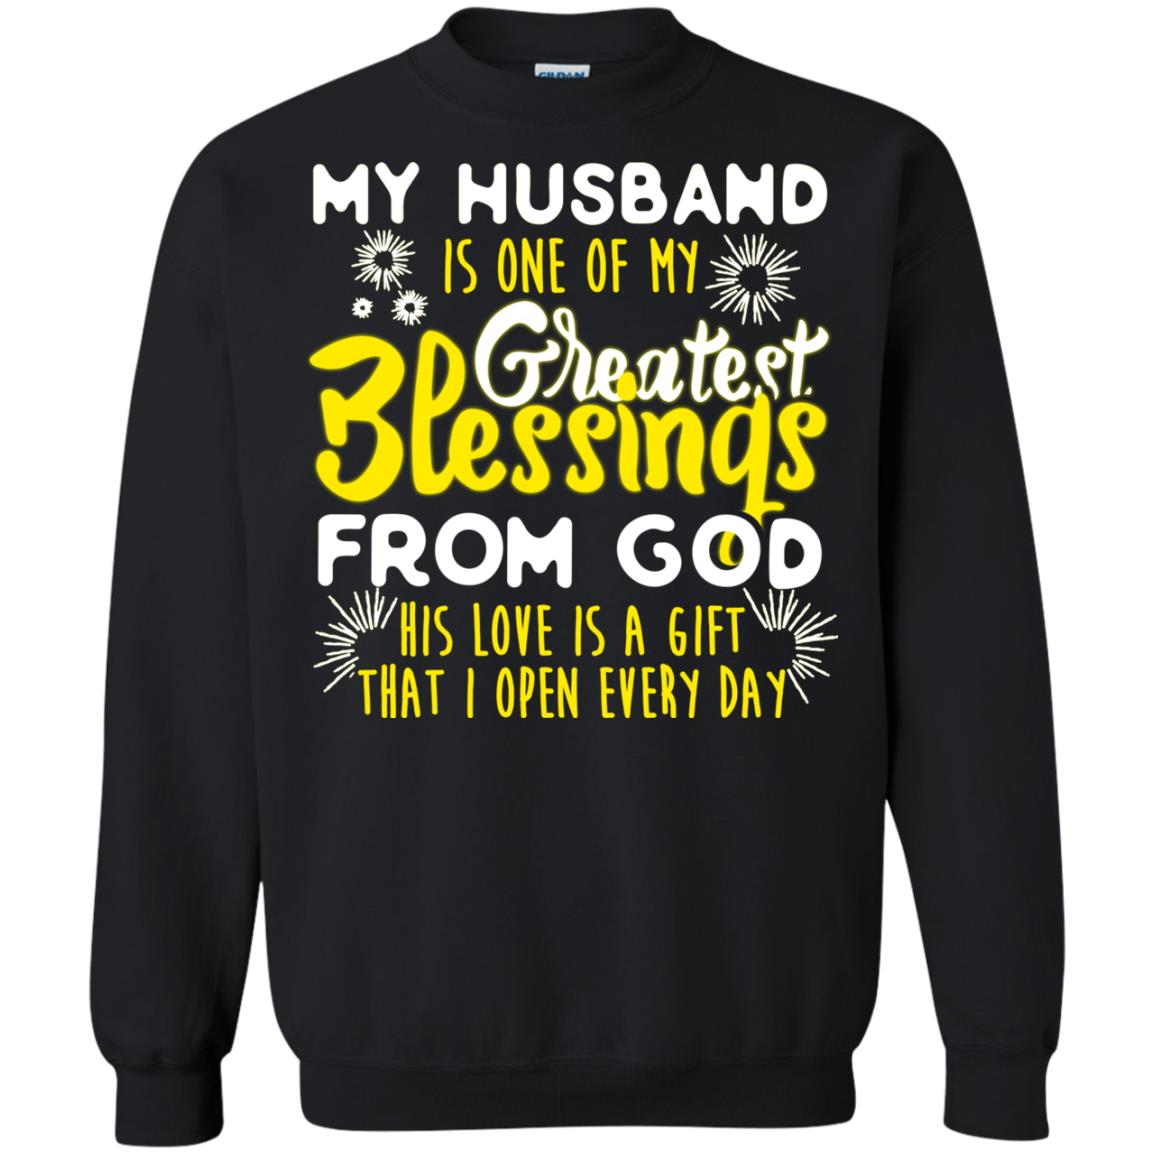 My Husband Is One Of My Greatest Blessings From God His Love Is A Gift That I Open Every Day Shirt For WifeG180 Gildan Crewneck Pullover Sweatshirt 8 oz.